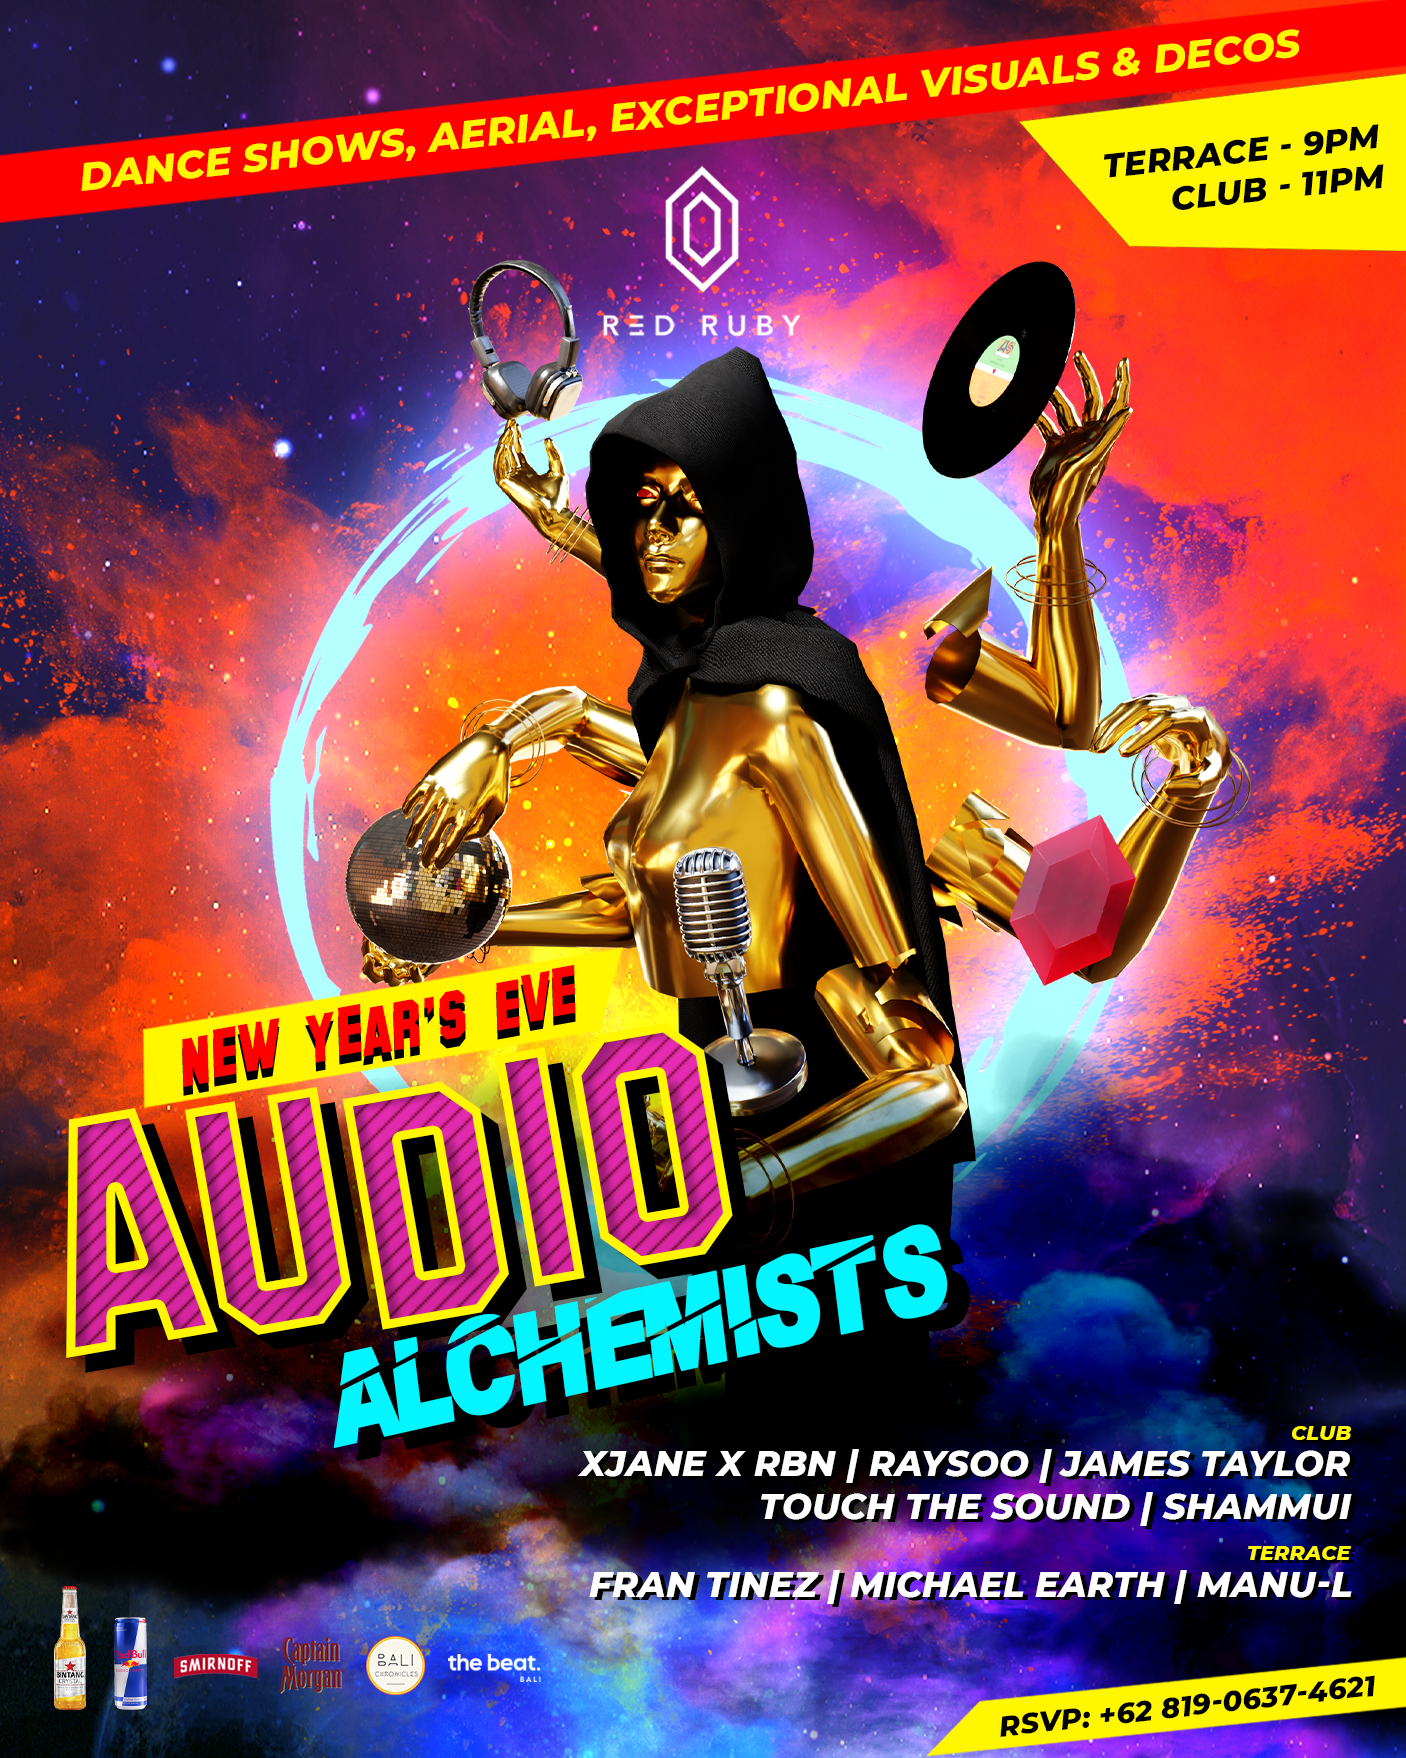 RED RUBY’S AUDIO ALCHEMISTS THIS NYE – SATURDAY DECEMBER 31ST thumbnail image